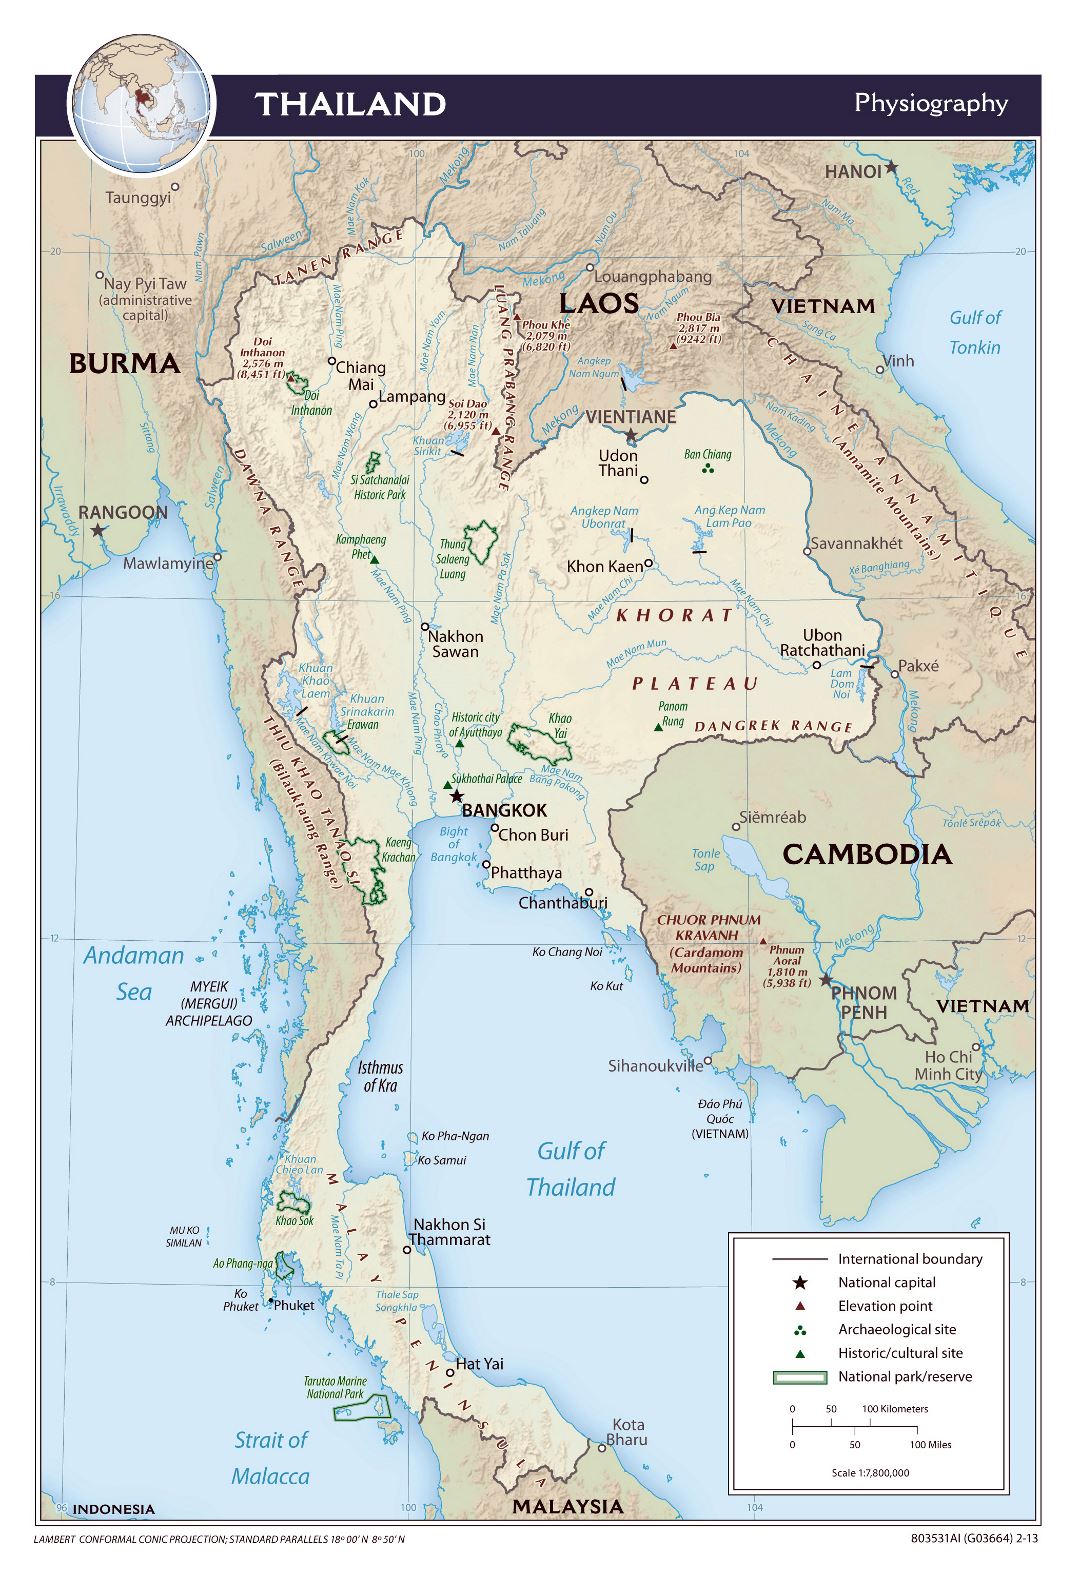 Large physiography map of Thailand - 2013